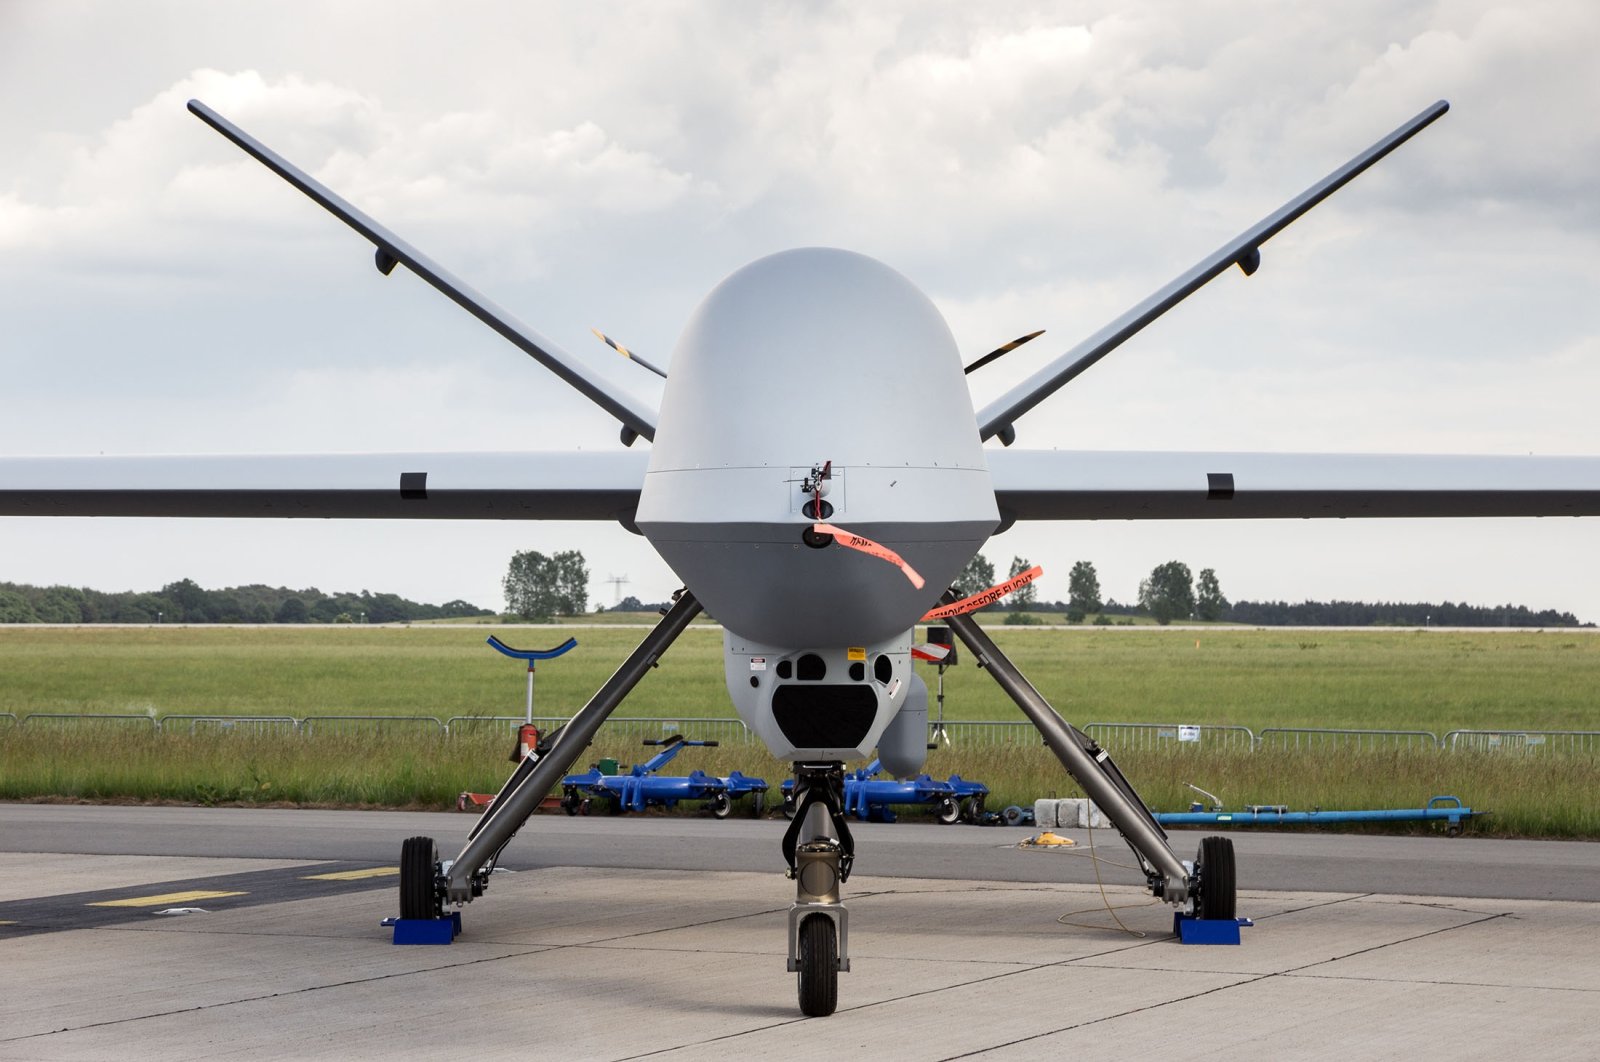 A U.S. Air Force drone on display at the Exhibition ILA Berlin Air Show, in Berlin, Germany, June 2, 2016. (Shutterstock Photo)